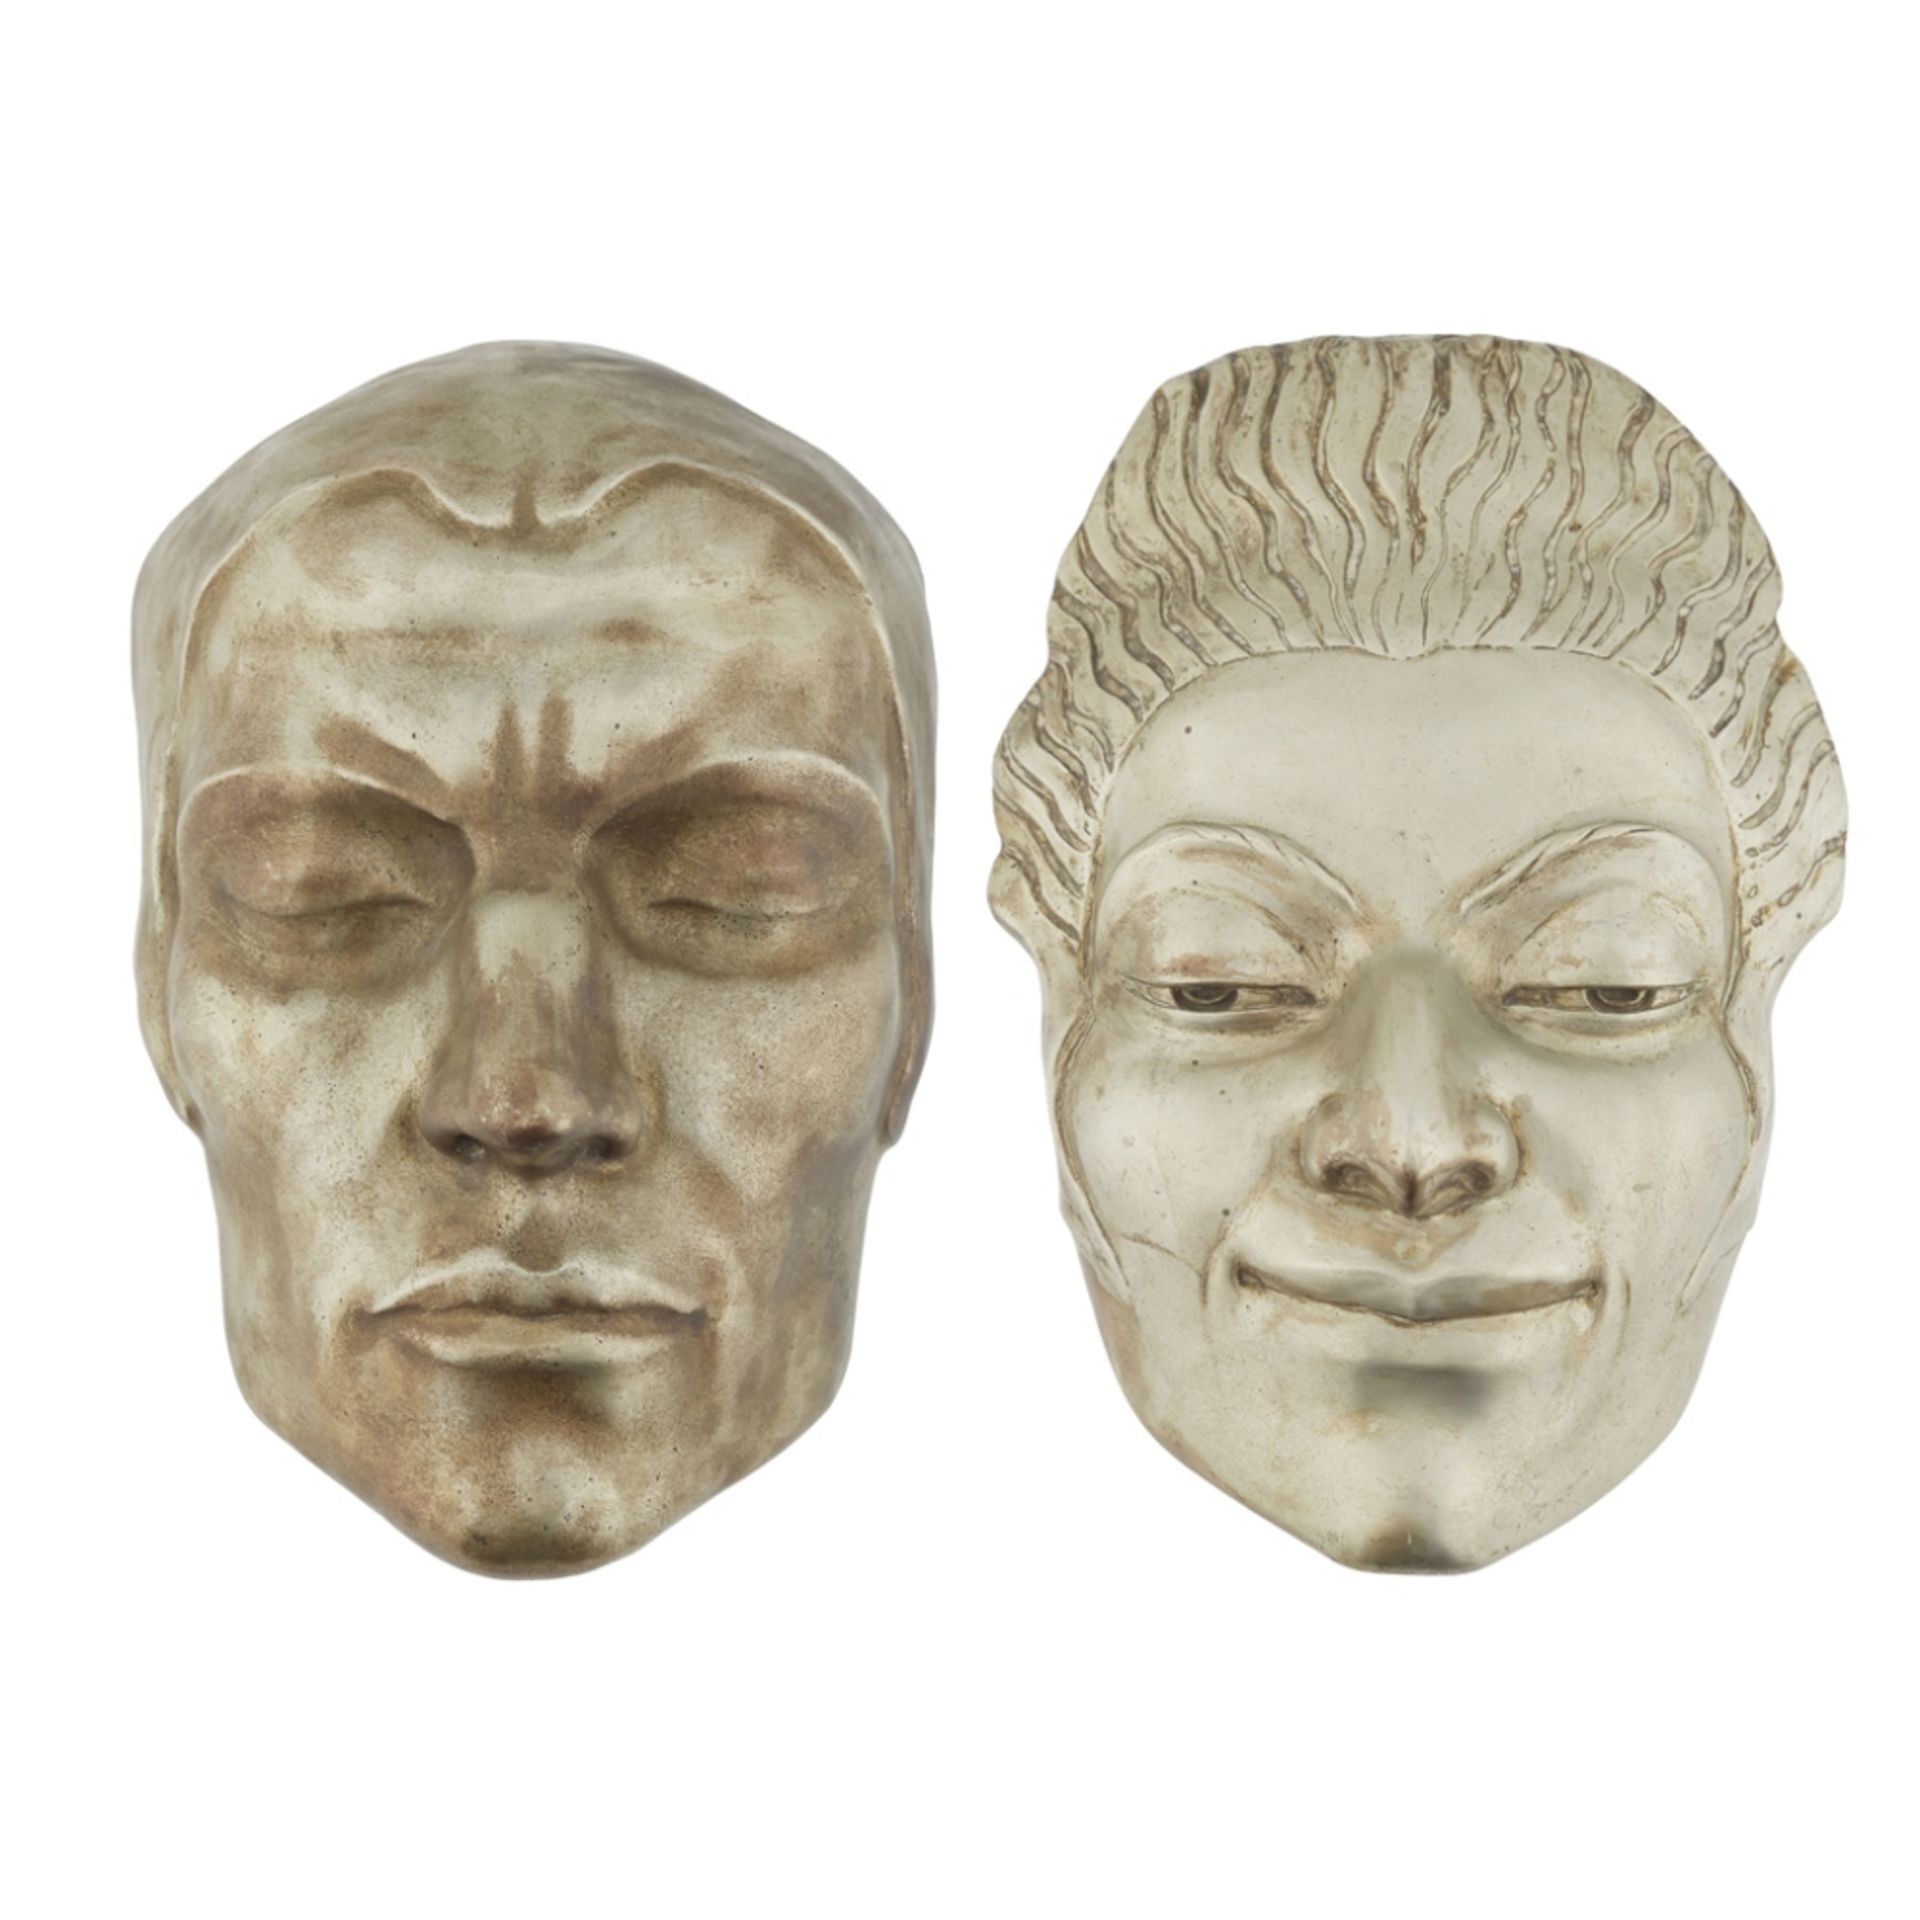 ENGLISH SCHOOL TWO ART DECO SILVERED WALL MASKS, CIRCA 1920 one depicting the head of a man, bears